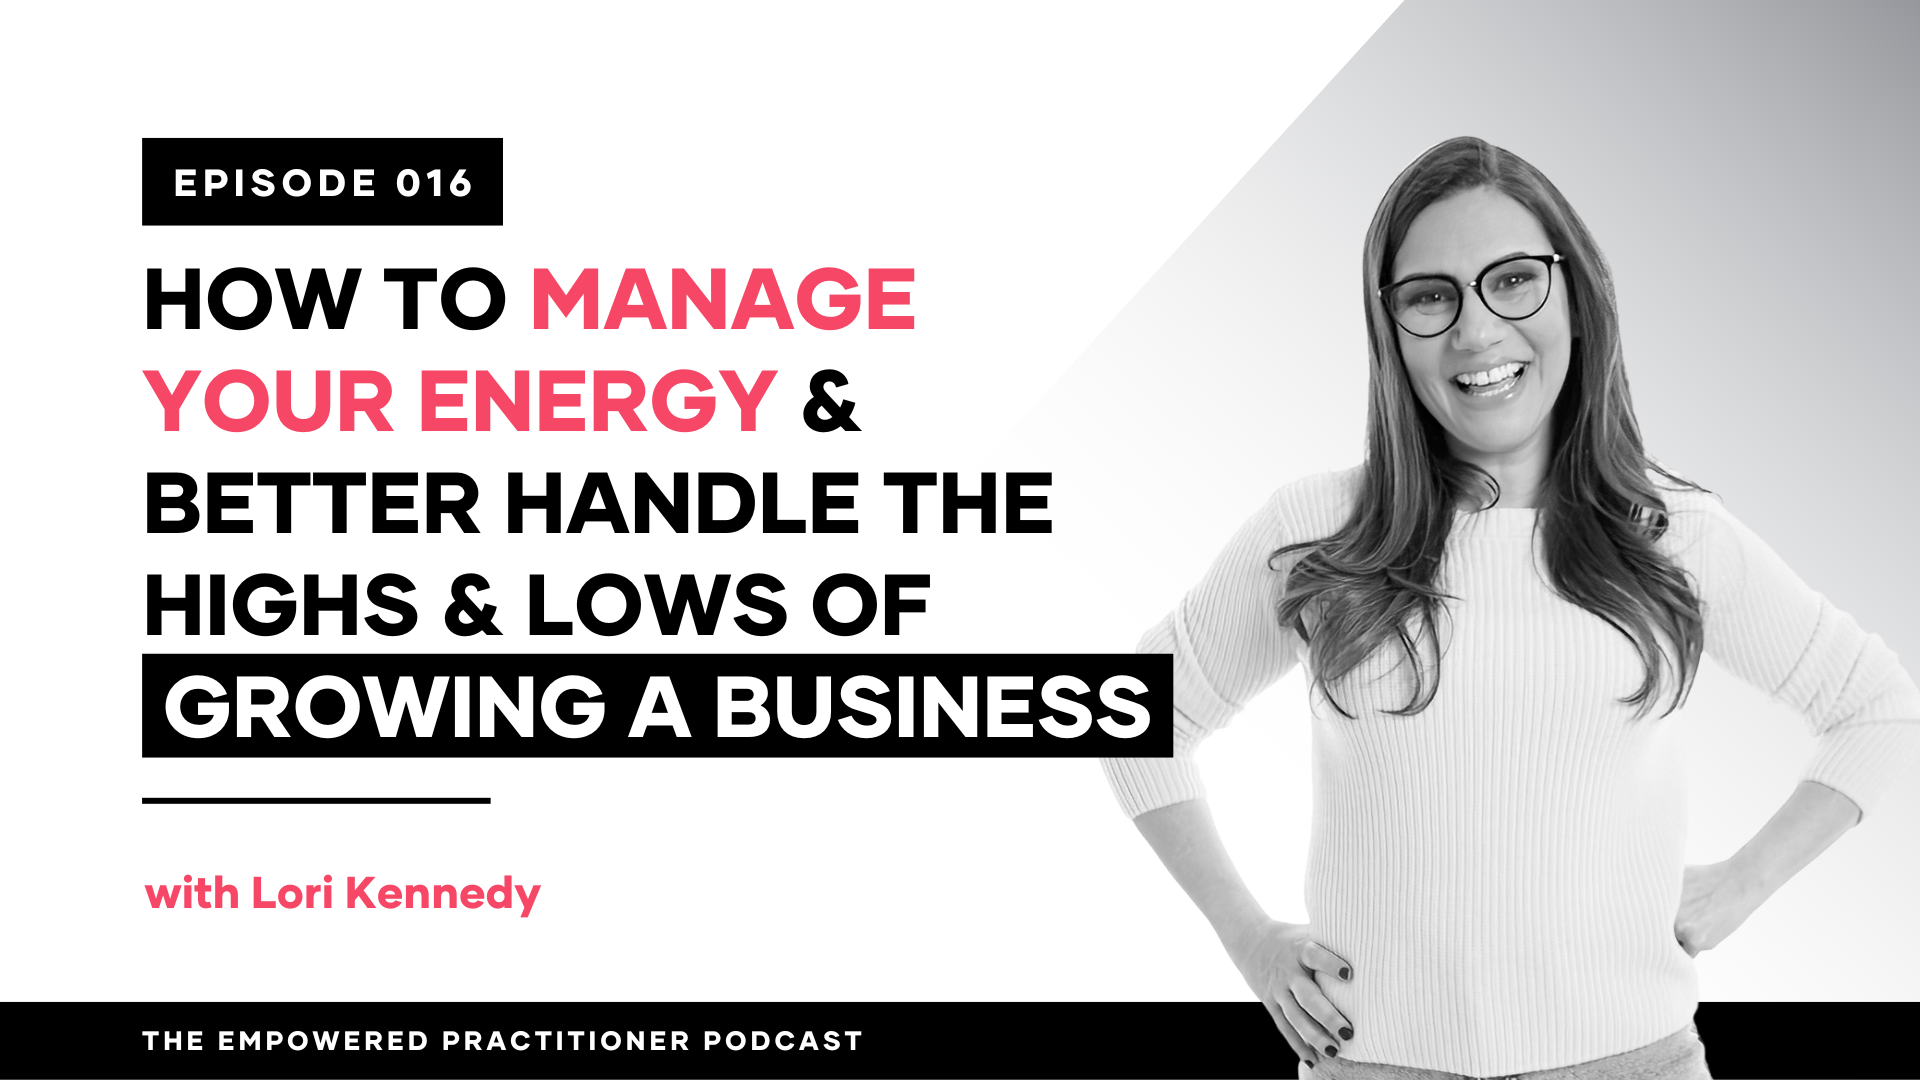 How To Manage Your Energy & Better Handle The Highs & Lows Of Growing A Business